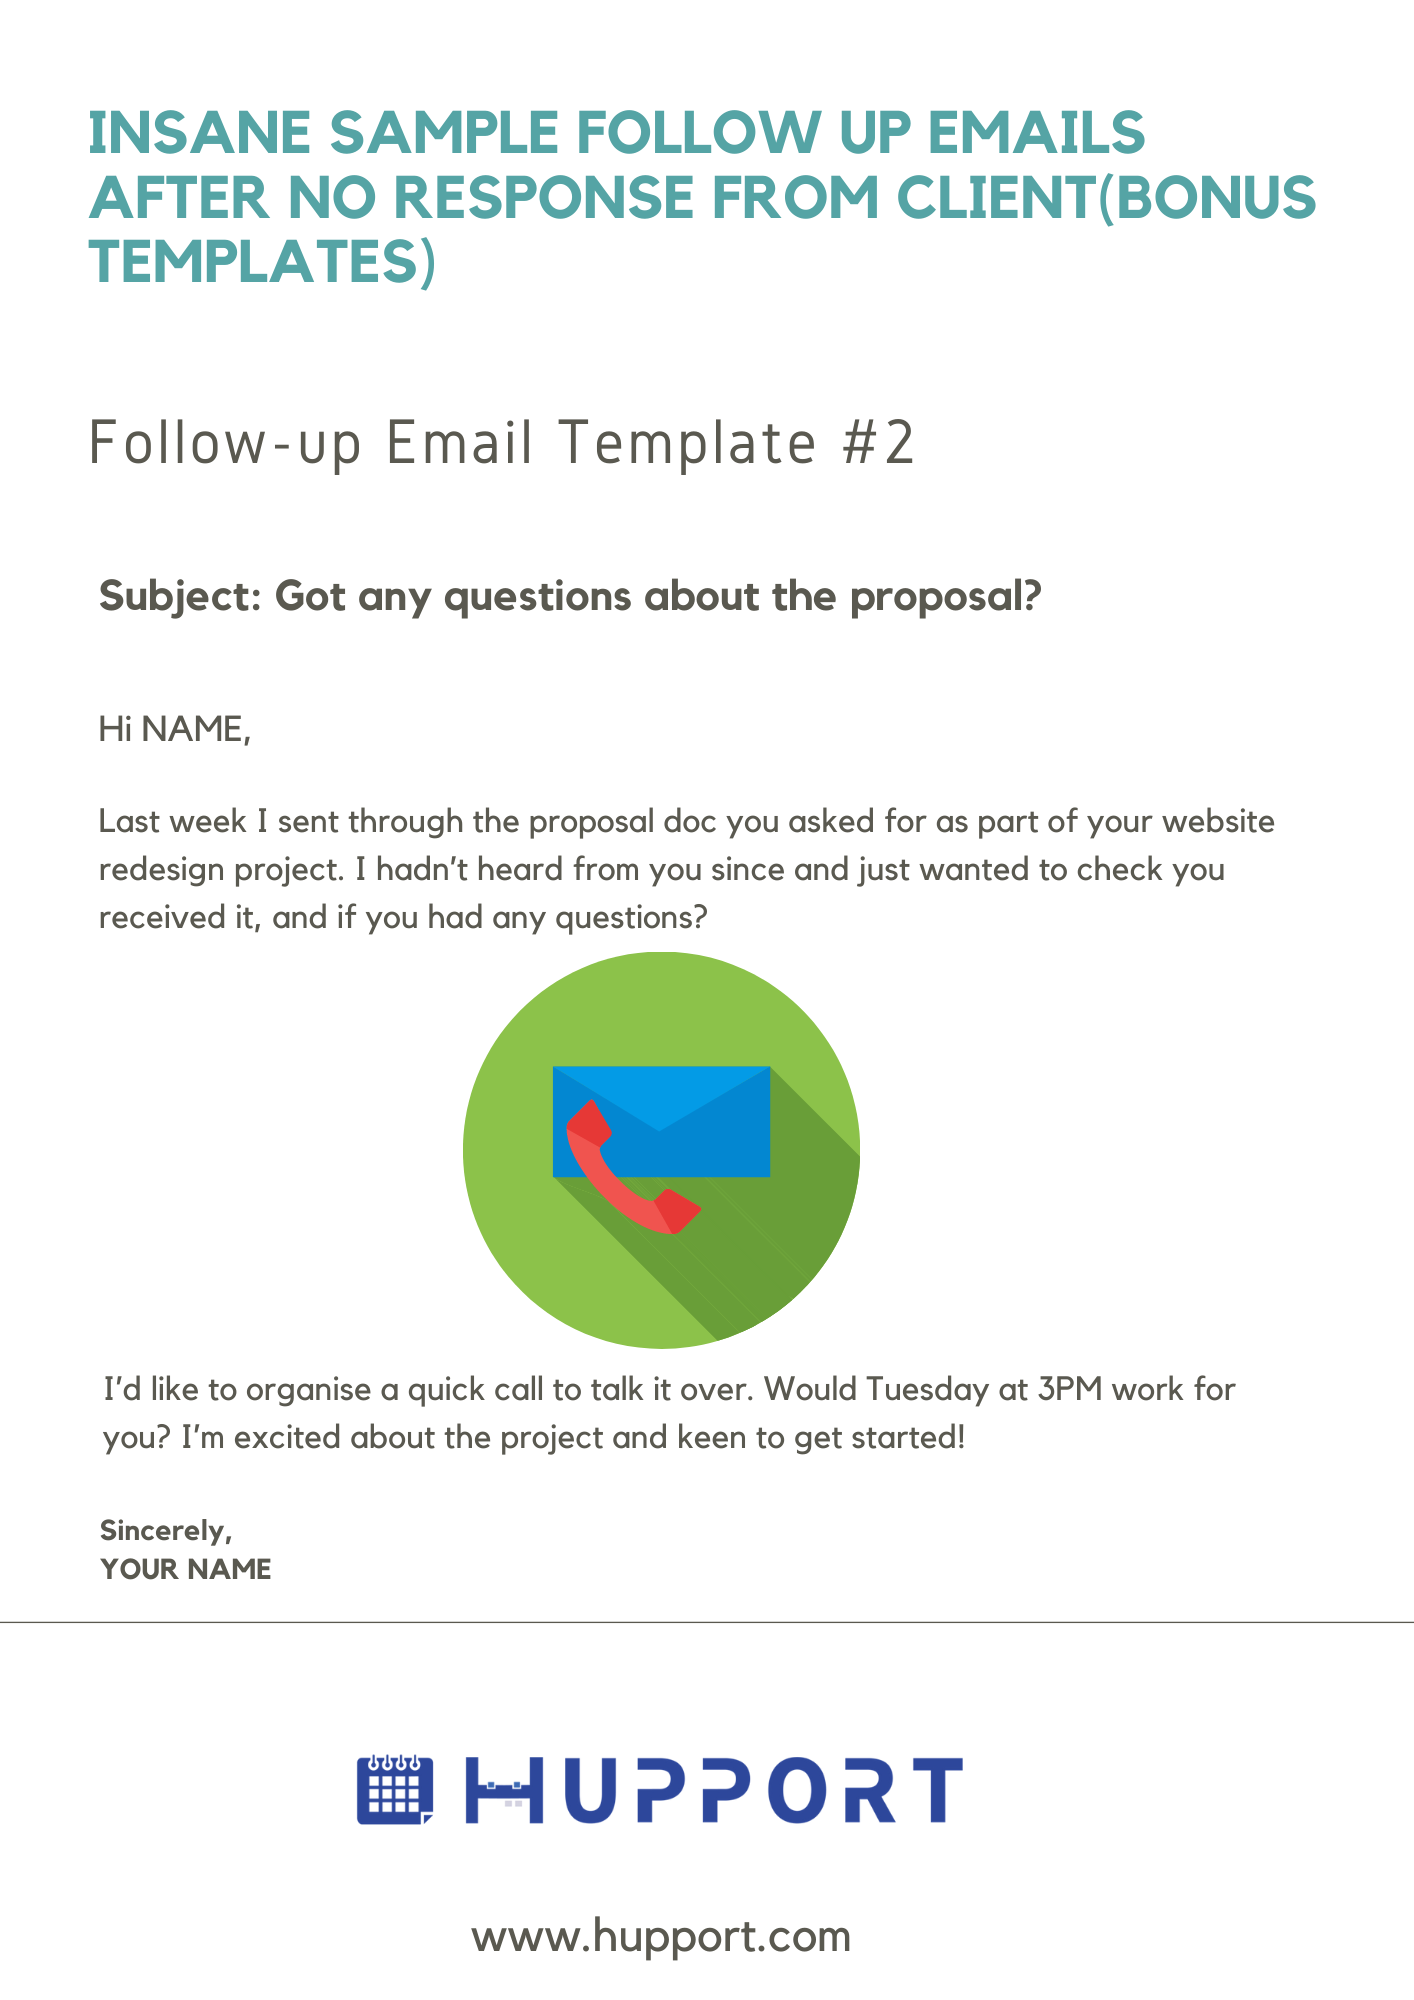 follow-up-email-template-2-free-online-appointment-scheduling-for-small-business-spa